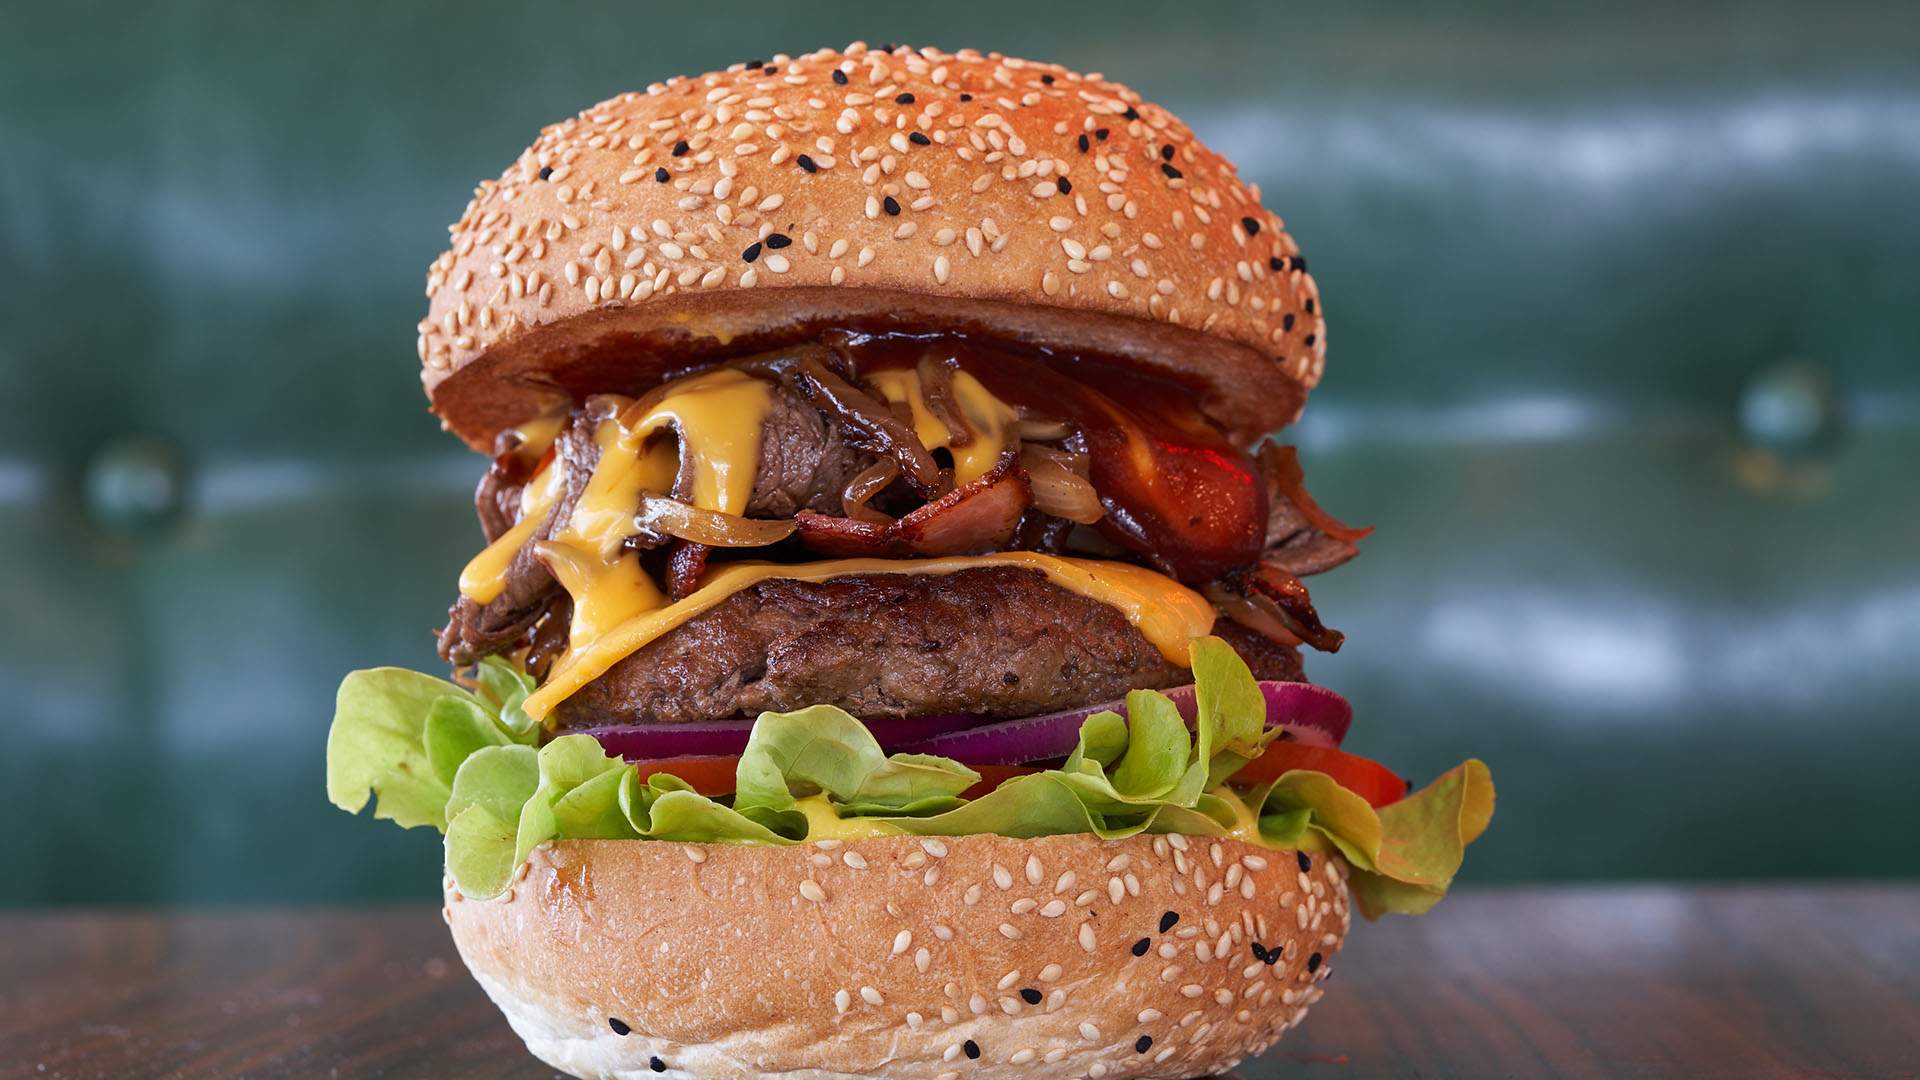 Burger Urge's International Day of Delicious